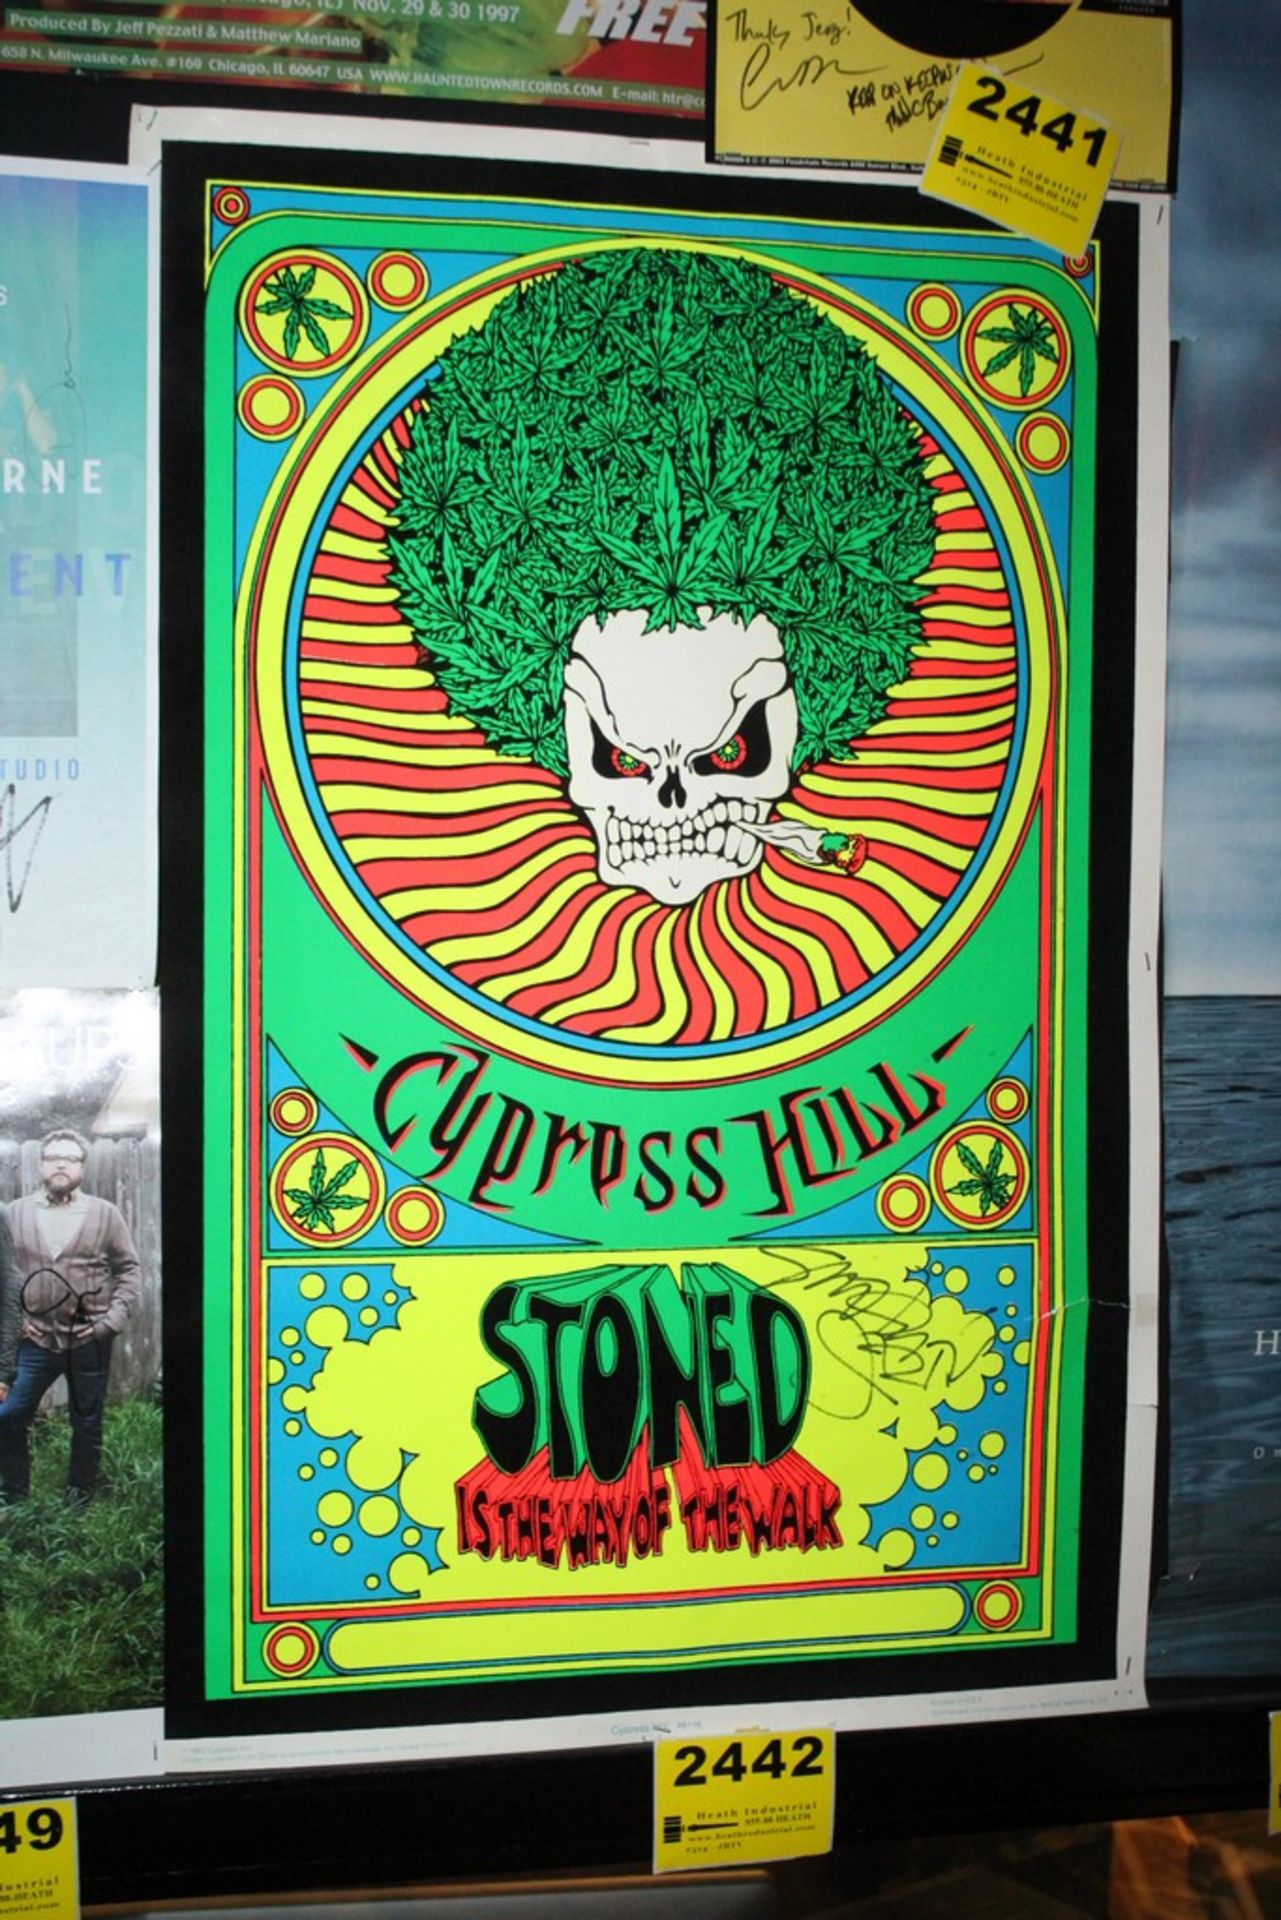 Cypress Hill "Sonted is the Way of the Walk" Signed Blacklight Poster